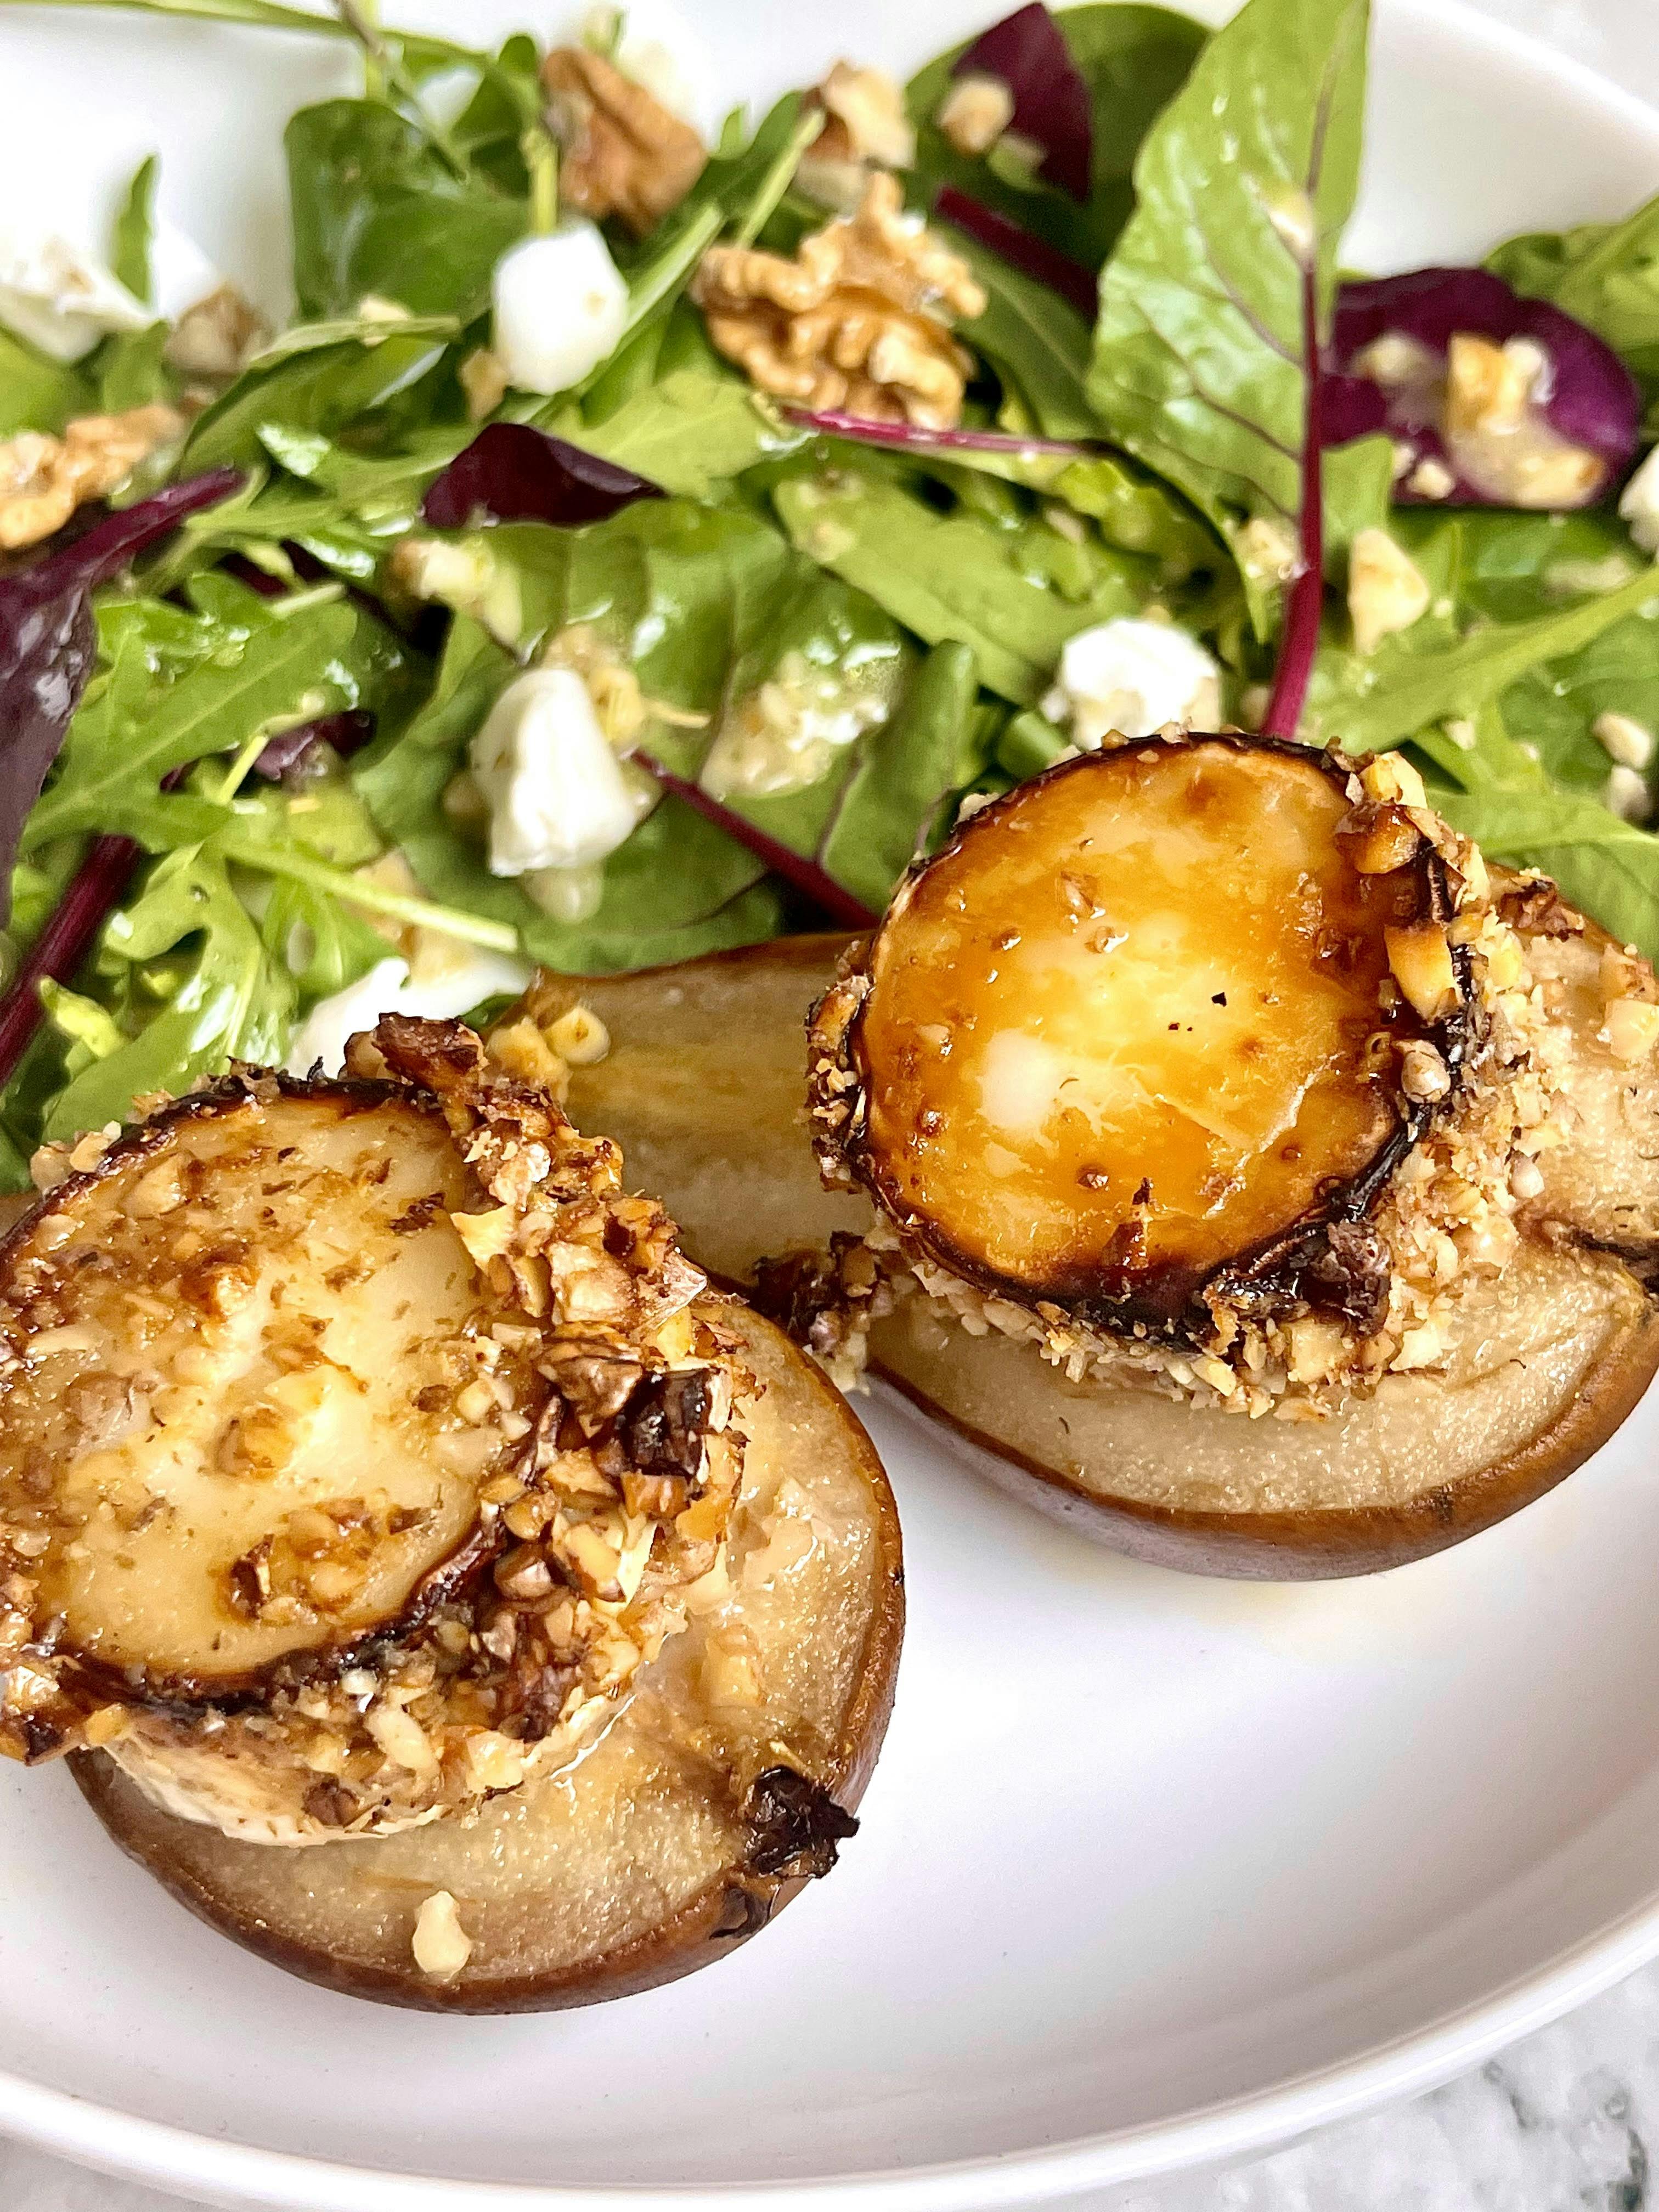 Picture for Baked Goats Cheese Pear and Walnut Salad 